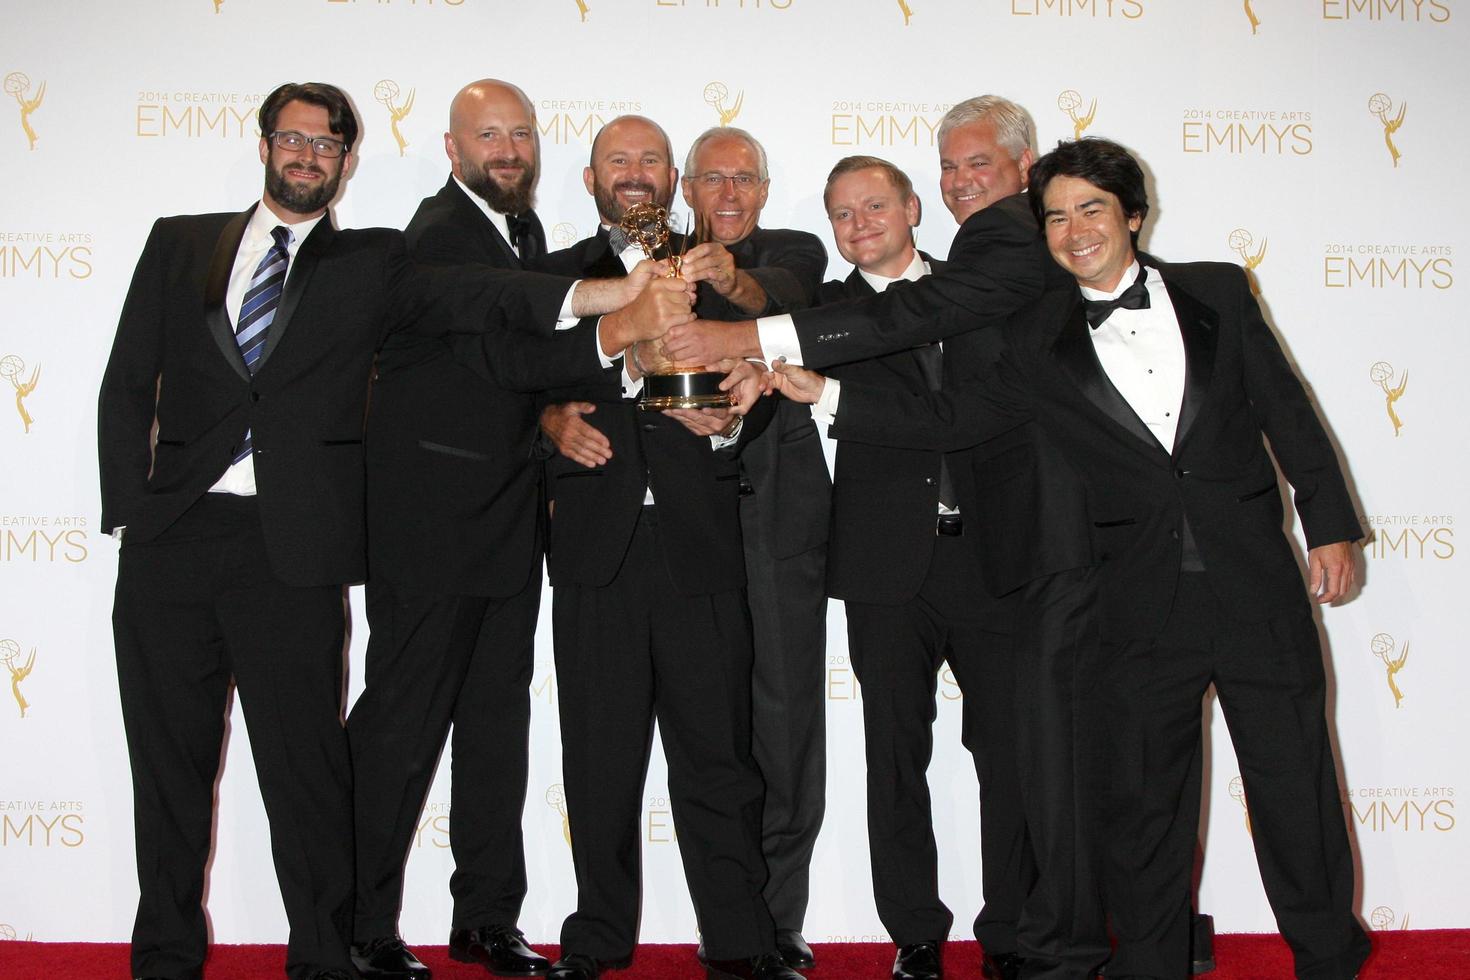 LOS ANGELES, AUG 16 - Deadliest Catch, Cinematraphy for a Reality Program at the 2014 Creative Emmy Awards, Press Room at Nokia Theater on August 16, 2014 in Los Angeles, CA photo